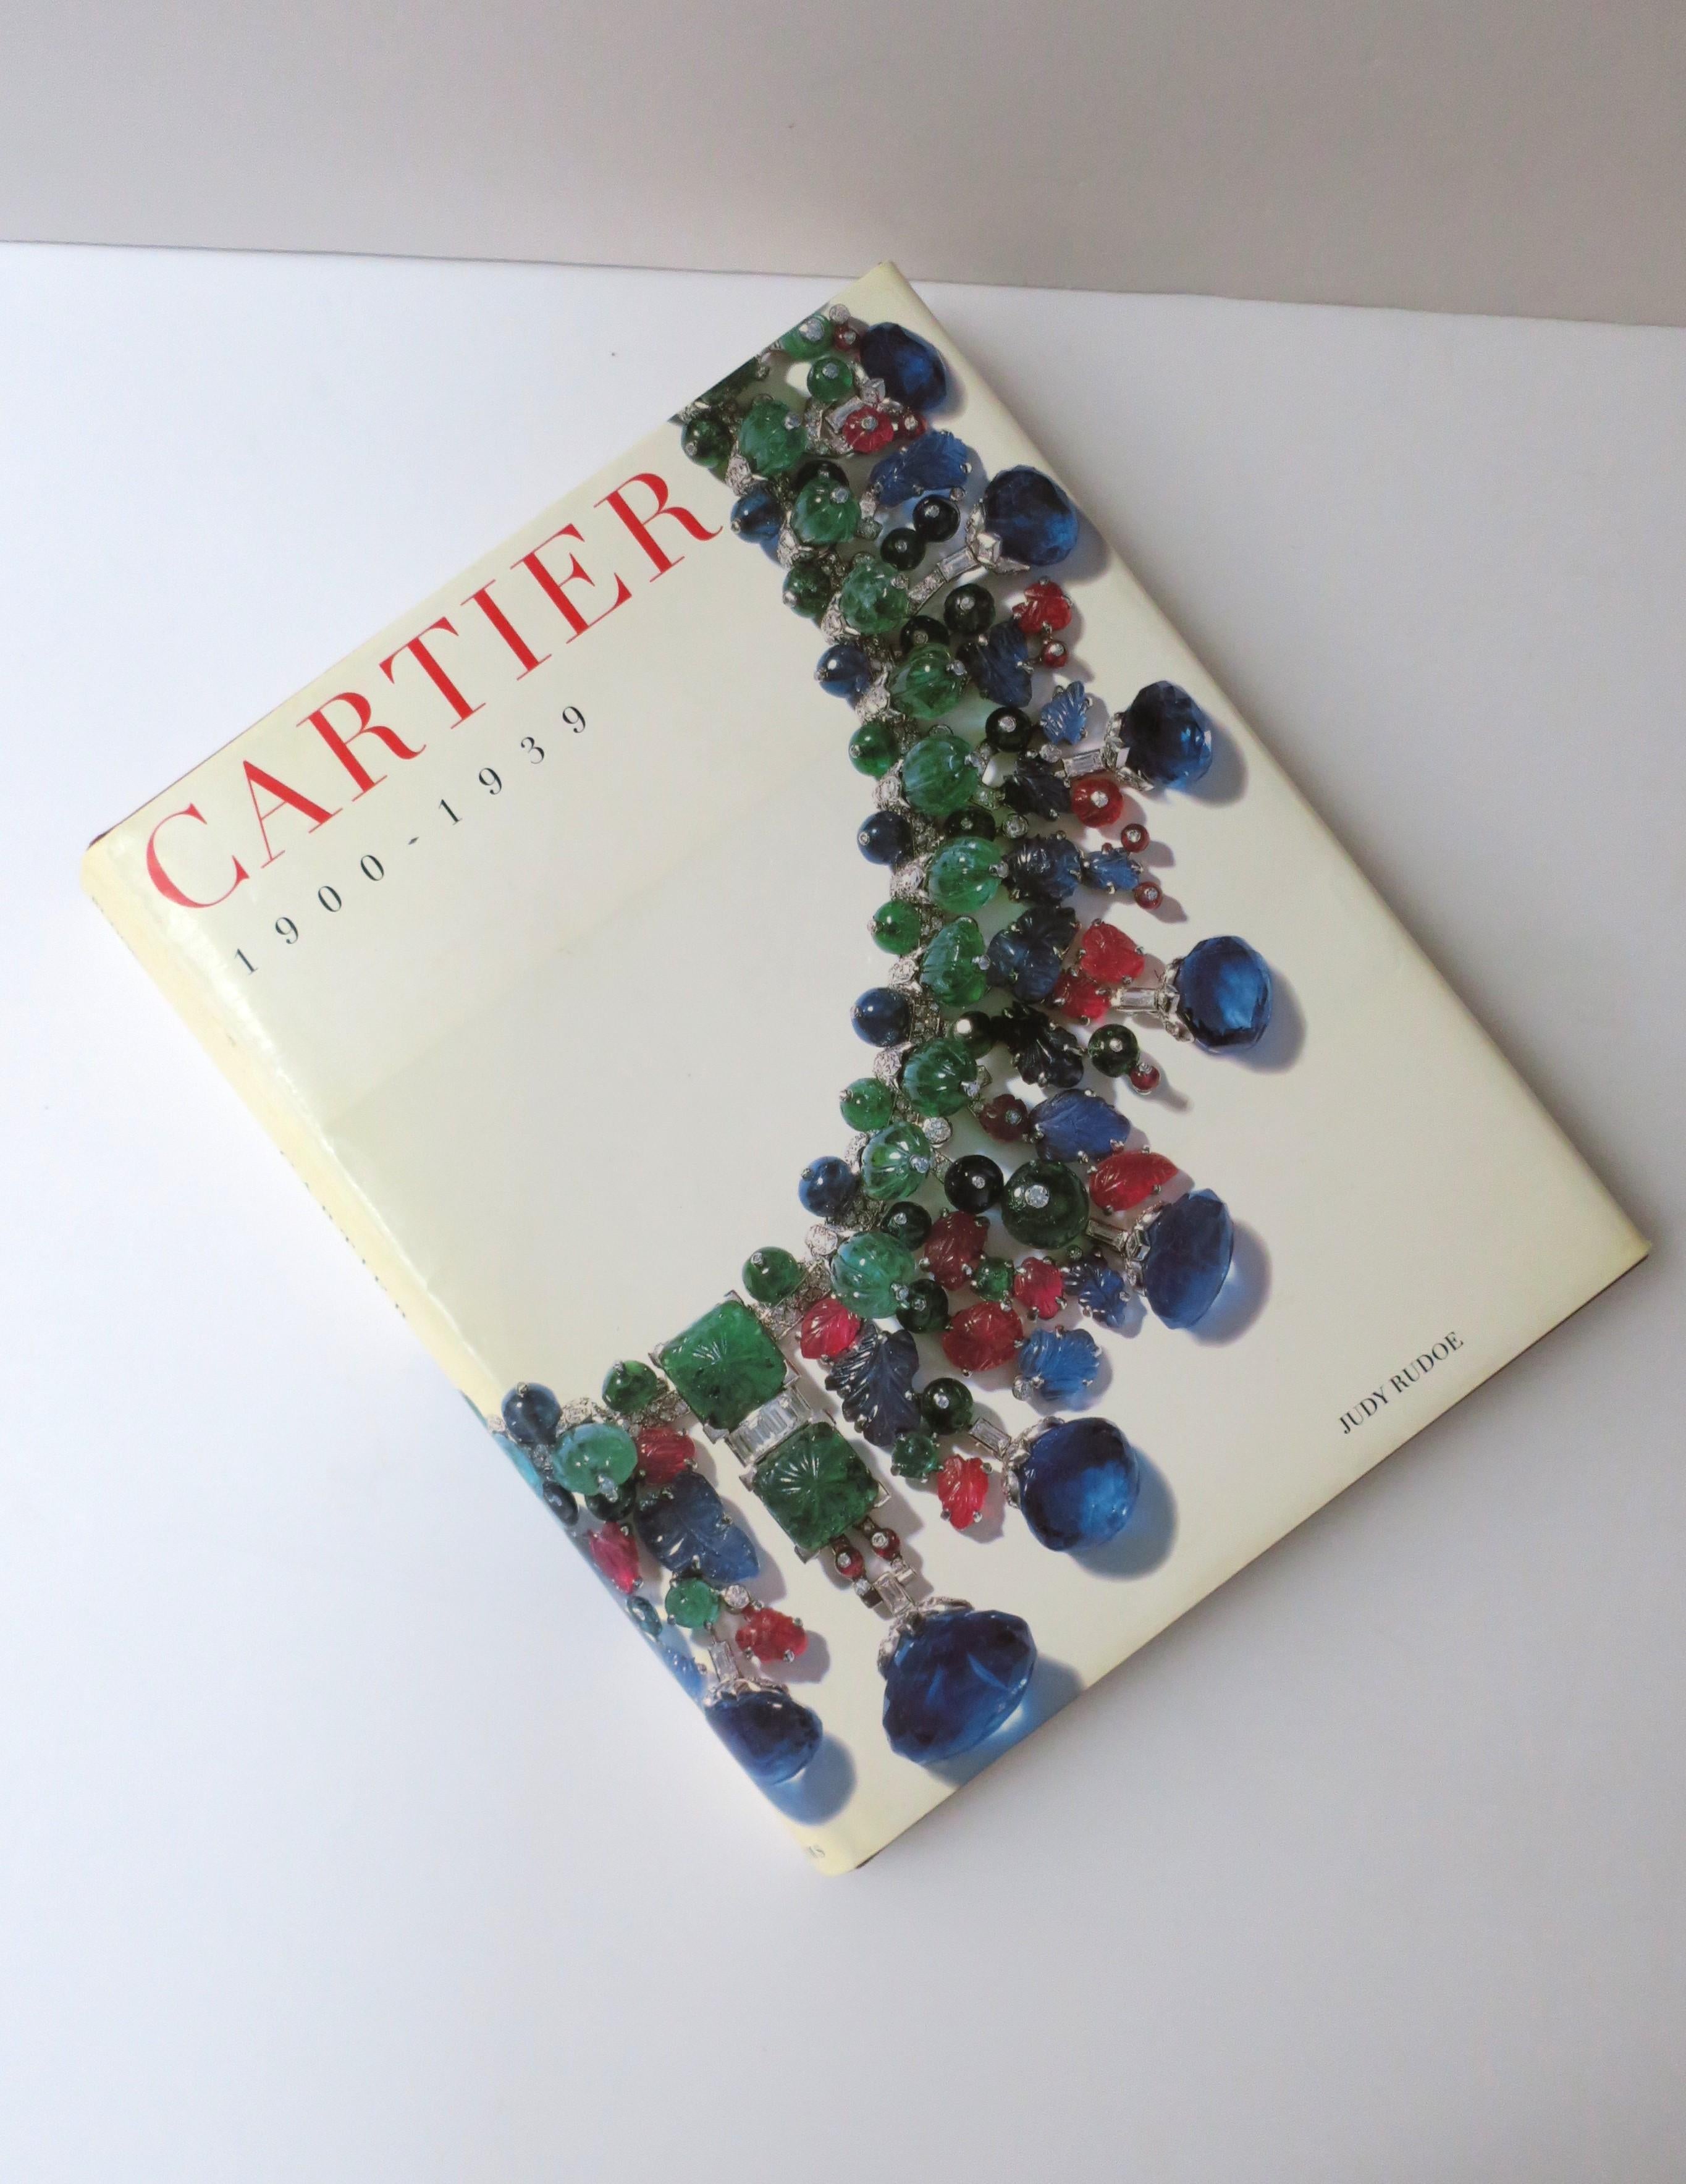 Italian Cartier High Jewelry Exhibition Coffee Table Book, 1997 For Sale